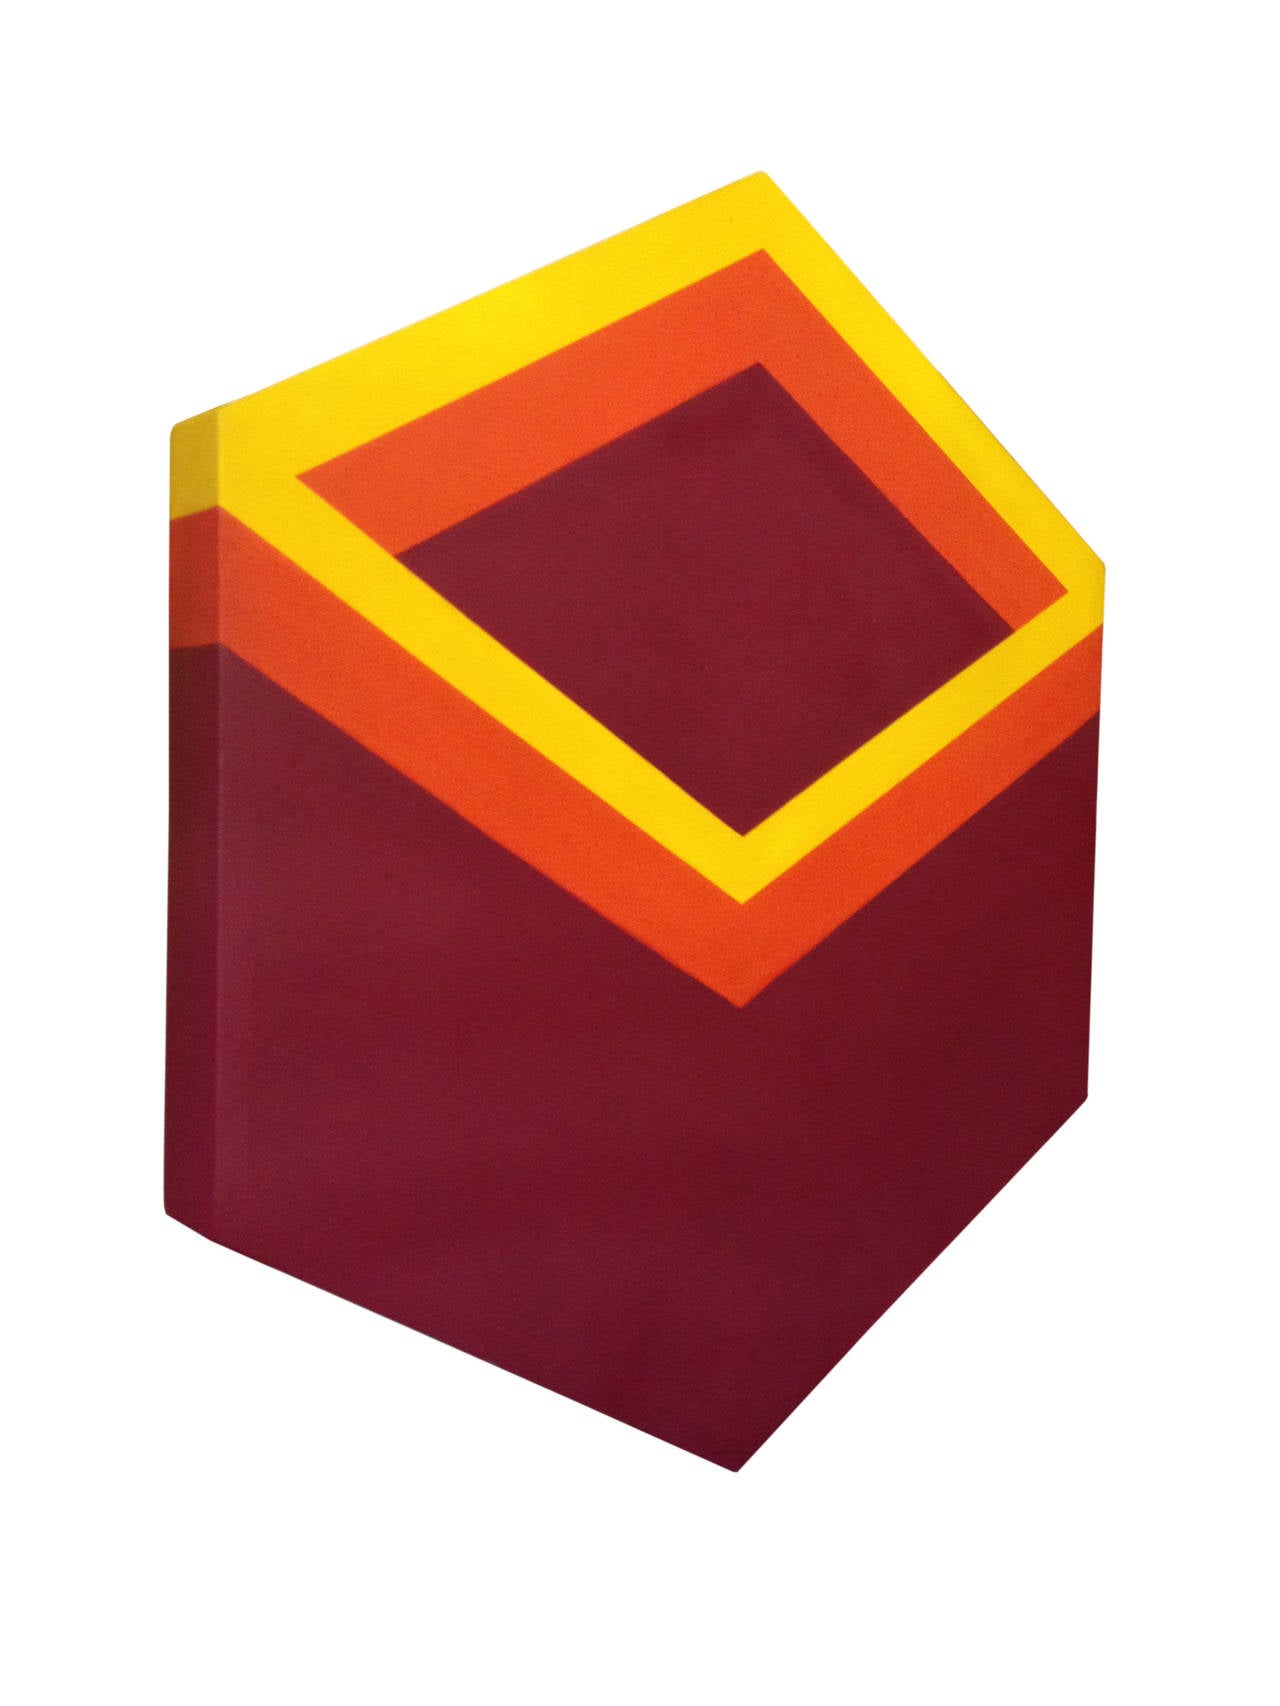 American 1970s Hexagonal Three Dimensional Perspectiv Painting